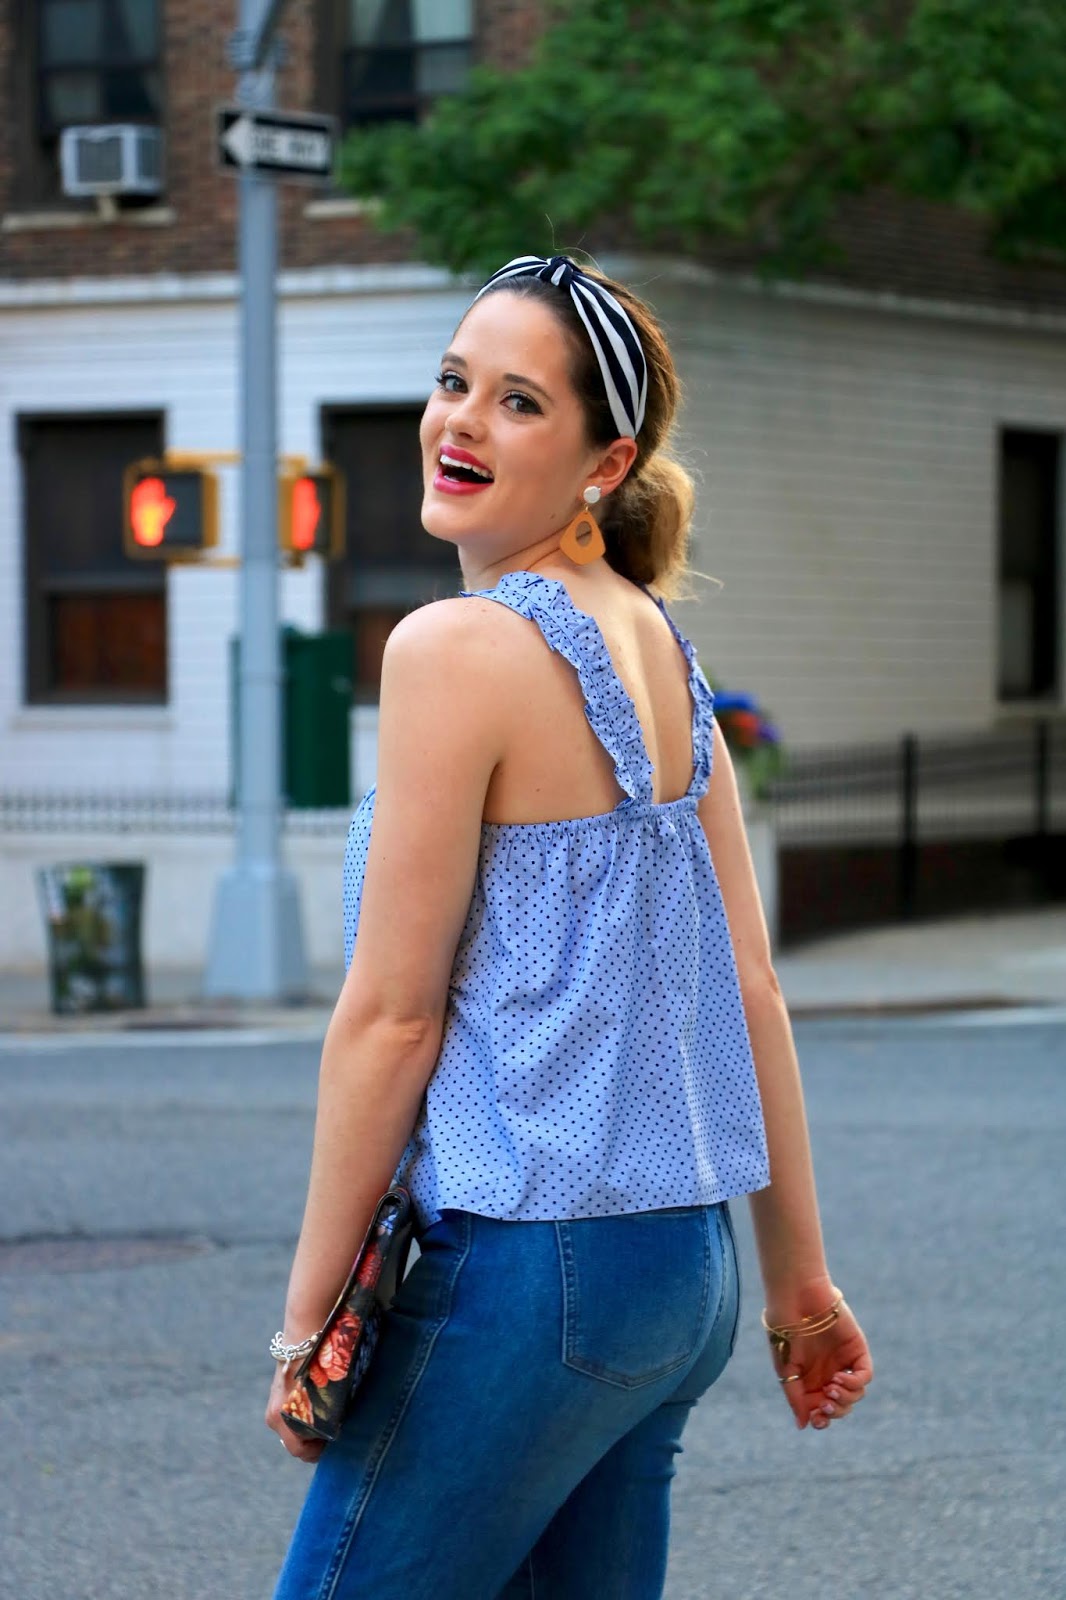 Nyc fashion blogger Kathleen Harper wearing a pattern-mixed outfit.